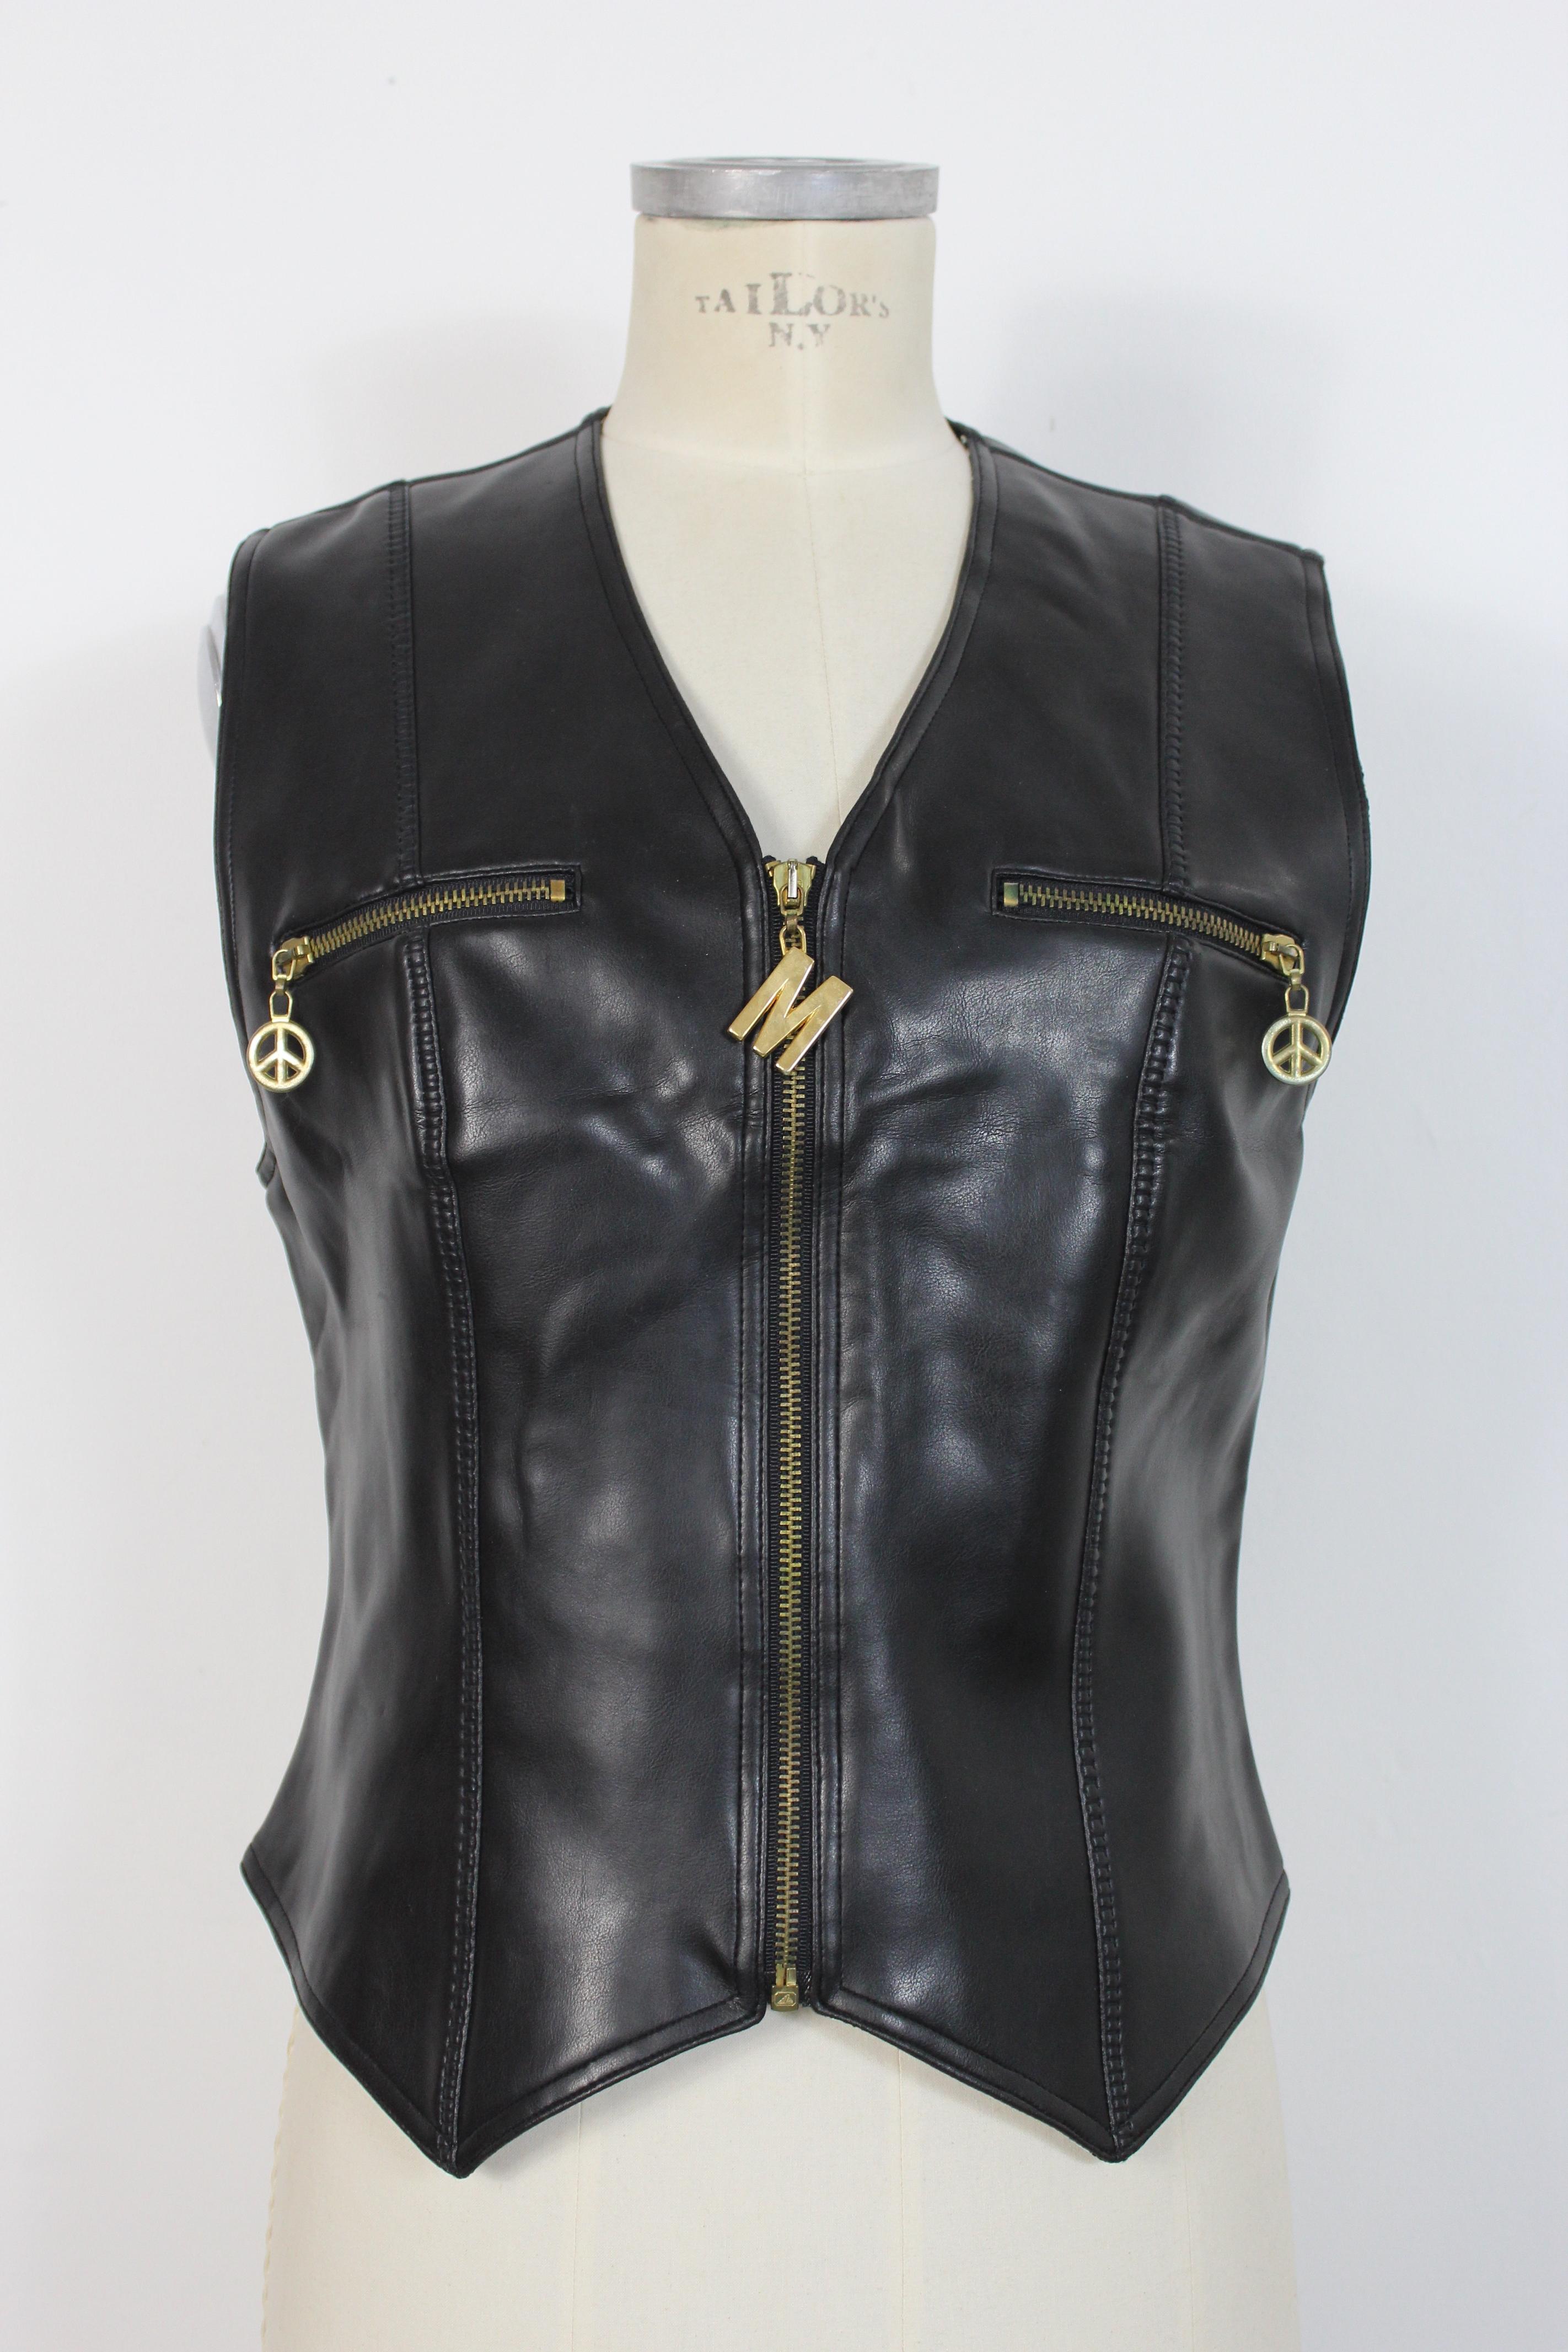 Moschino Jeans vintage 80s vest. Biker model women's vest. Black color with gold colored hinges. Faux leather fabric, 70% polyurethane 30% cotton, internally lined. Made in Italy.

Condition: Excellent

Item used few times, it remains in its